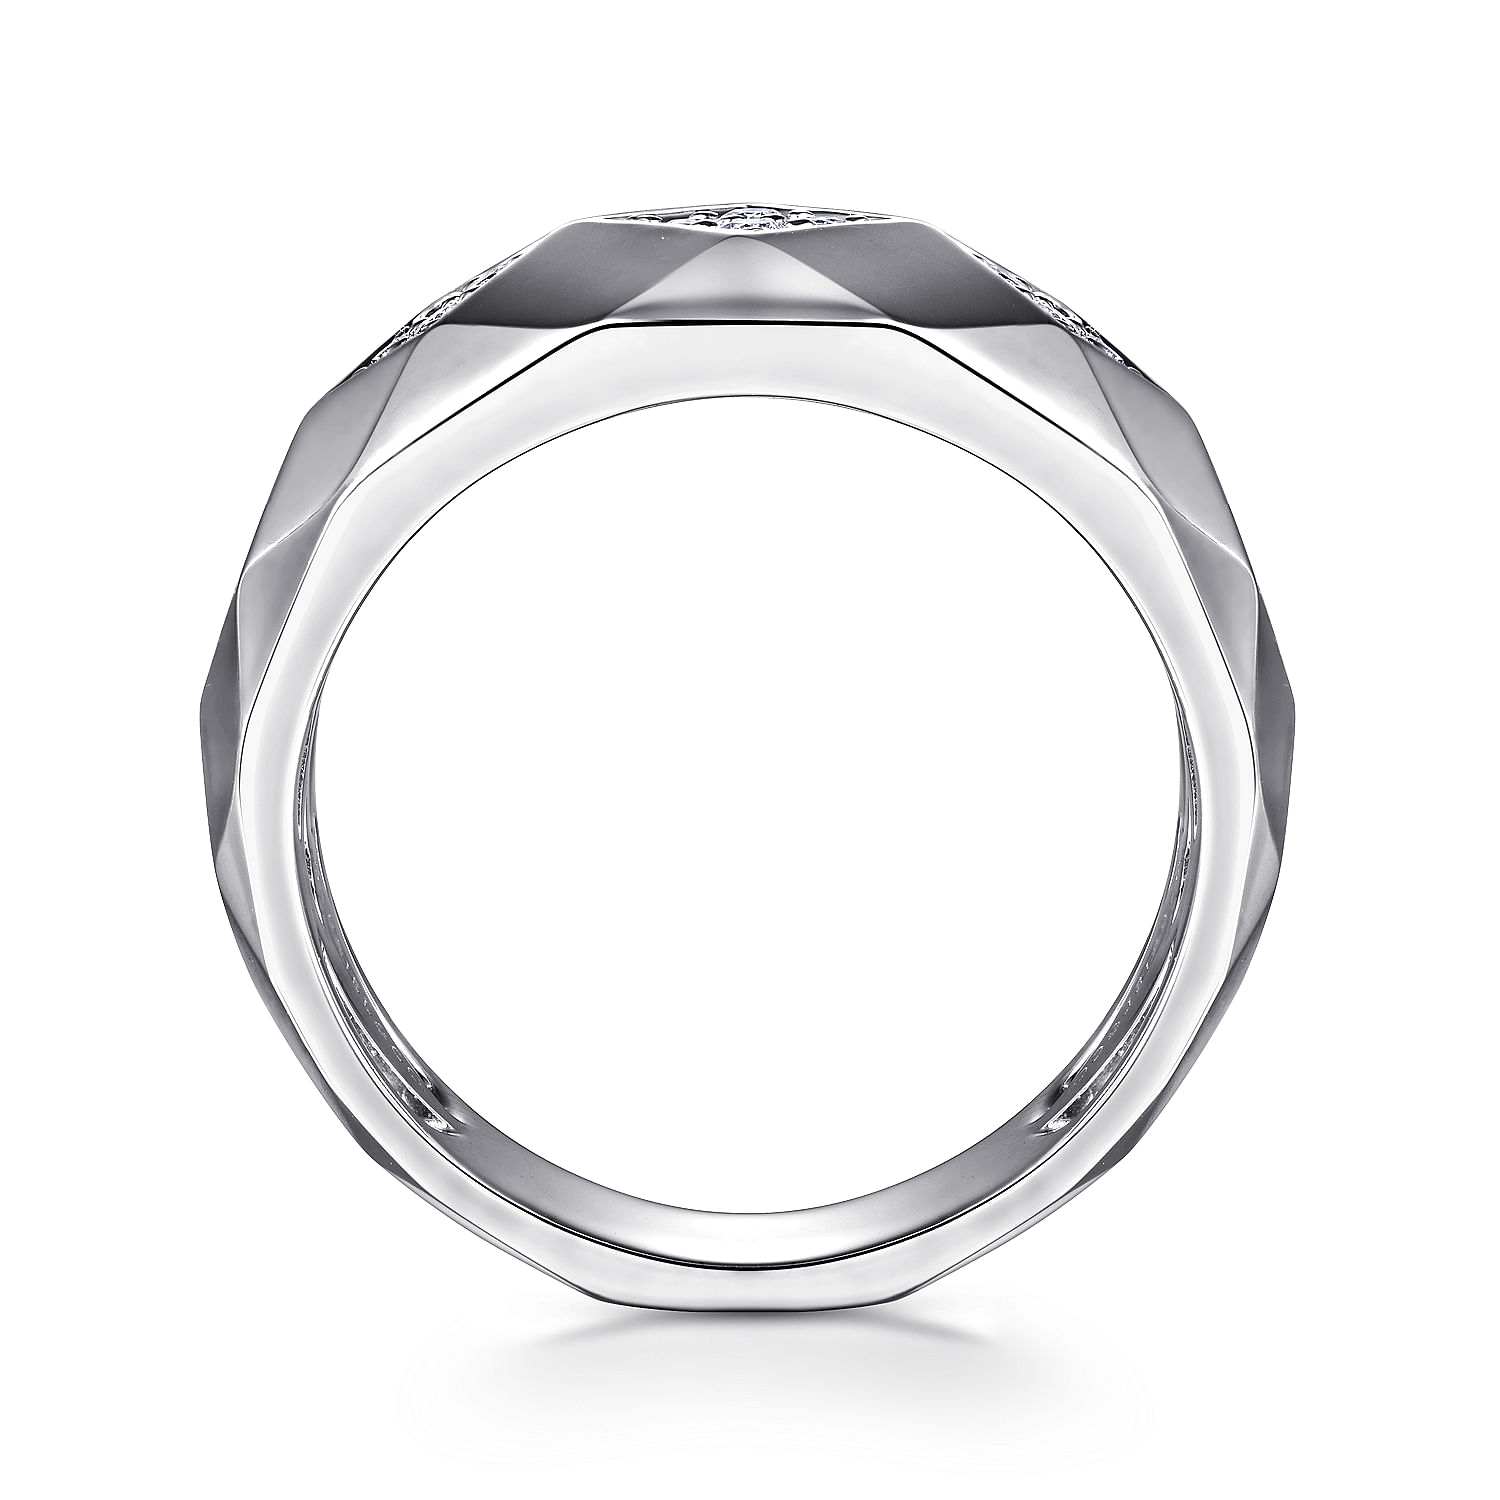 14K White Gold Faceted Diamond Ring in High Polished Finish